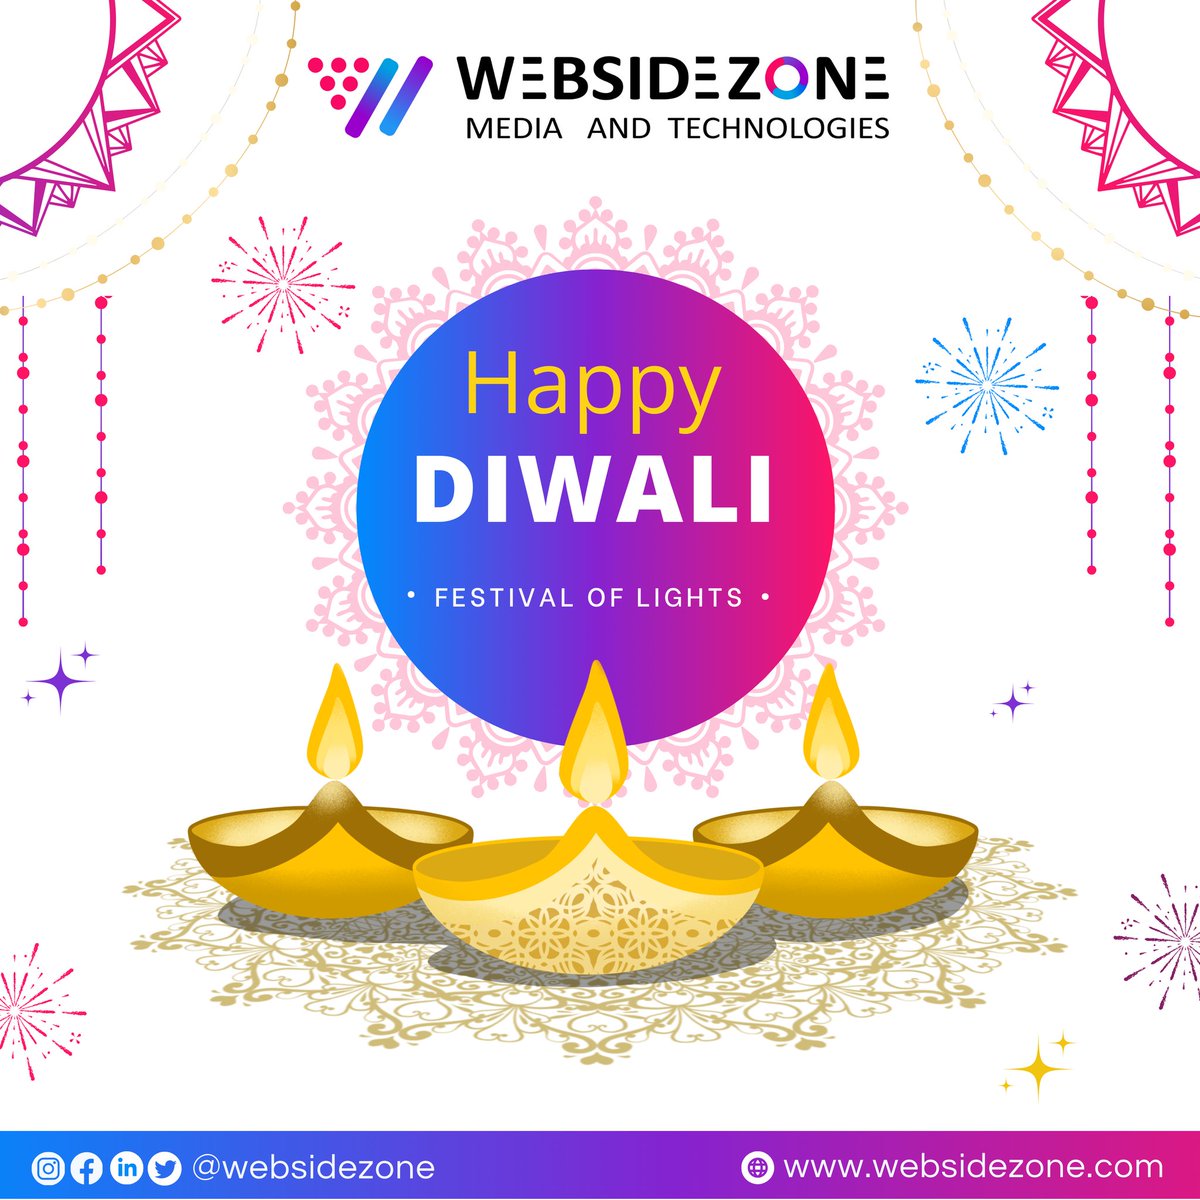 Happy and Prosperous Diwali 🪔

May your dreams shine as bright as the Diwali lights✨
.
.
.
.
.
.
.
.
#diwalivibes #happydiwali #diwali2023 #bestitcompany #businessconsultant #businessgrowth #websdesigner #completebusinesssolution